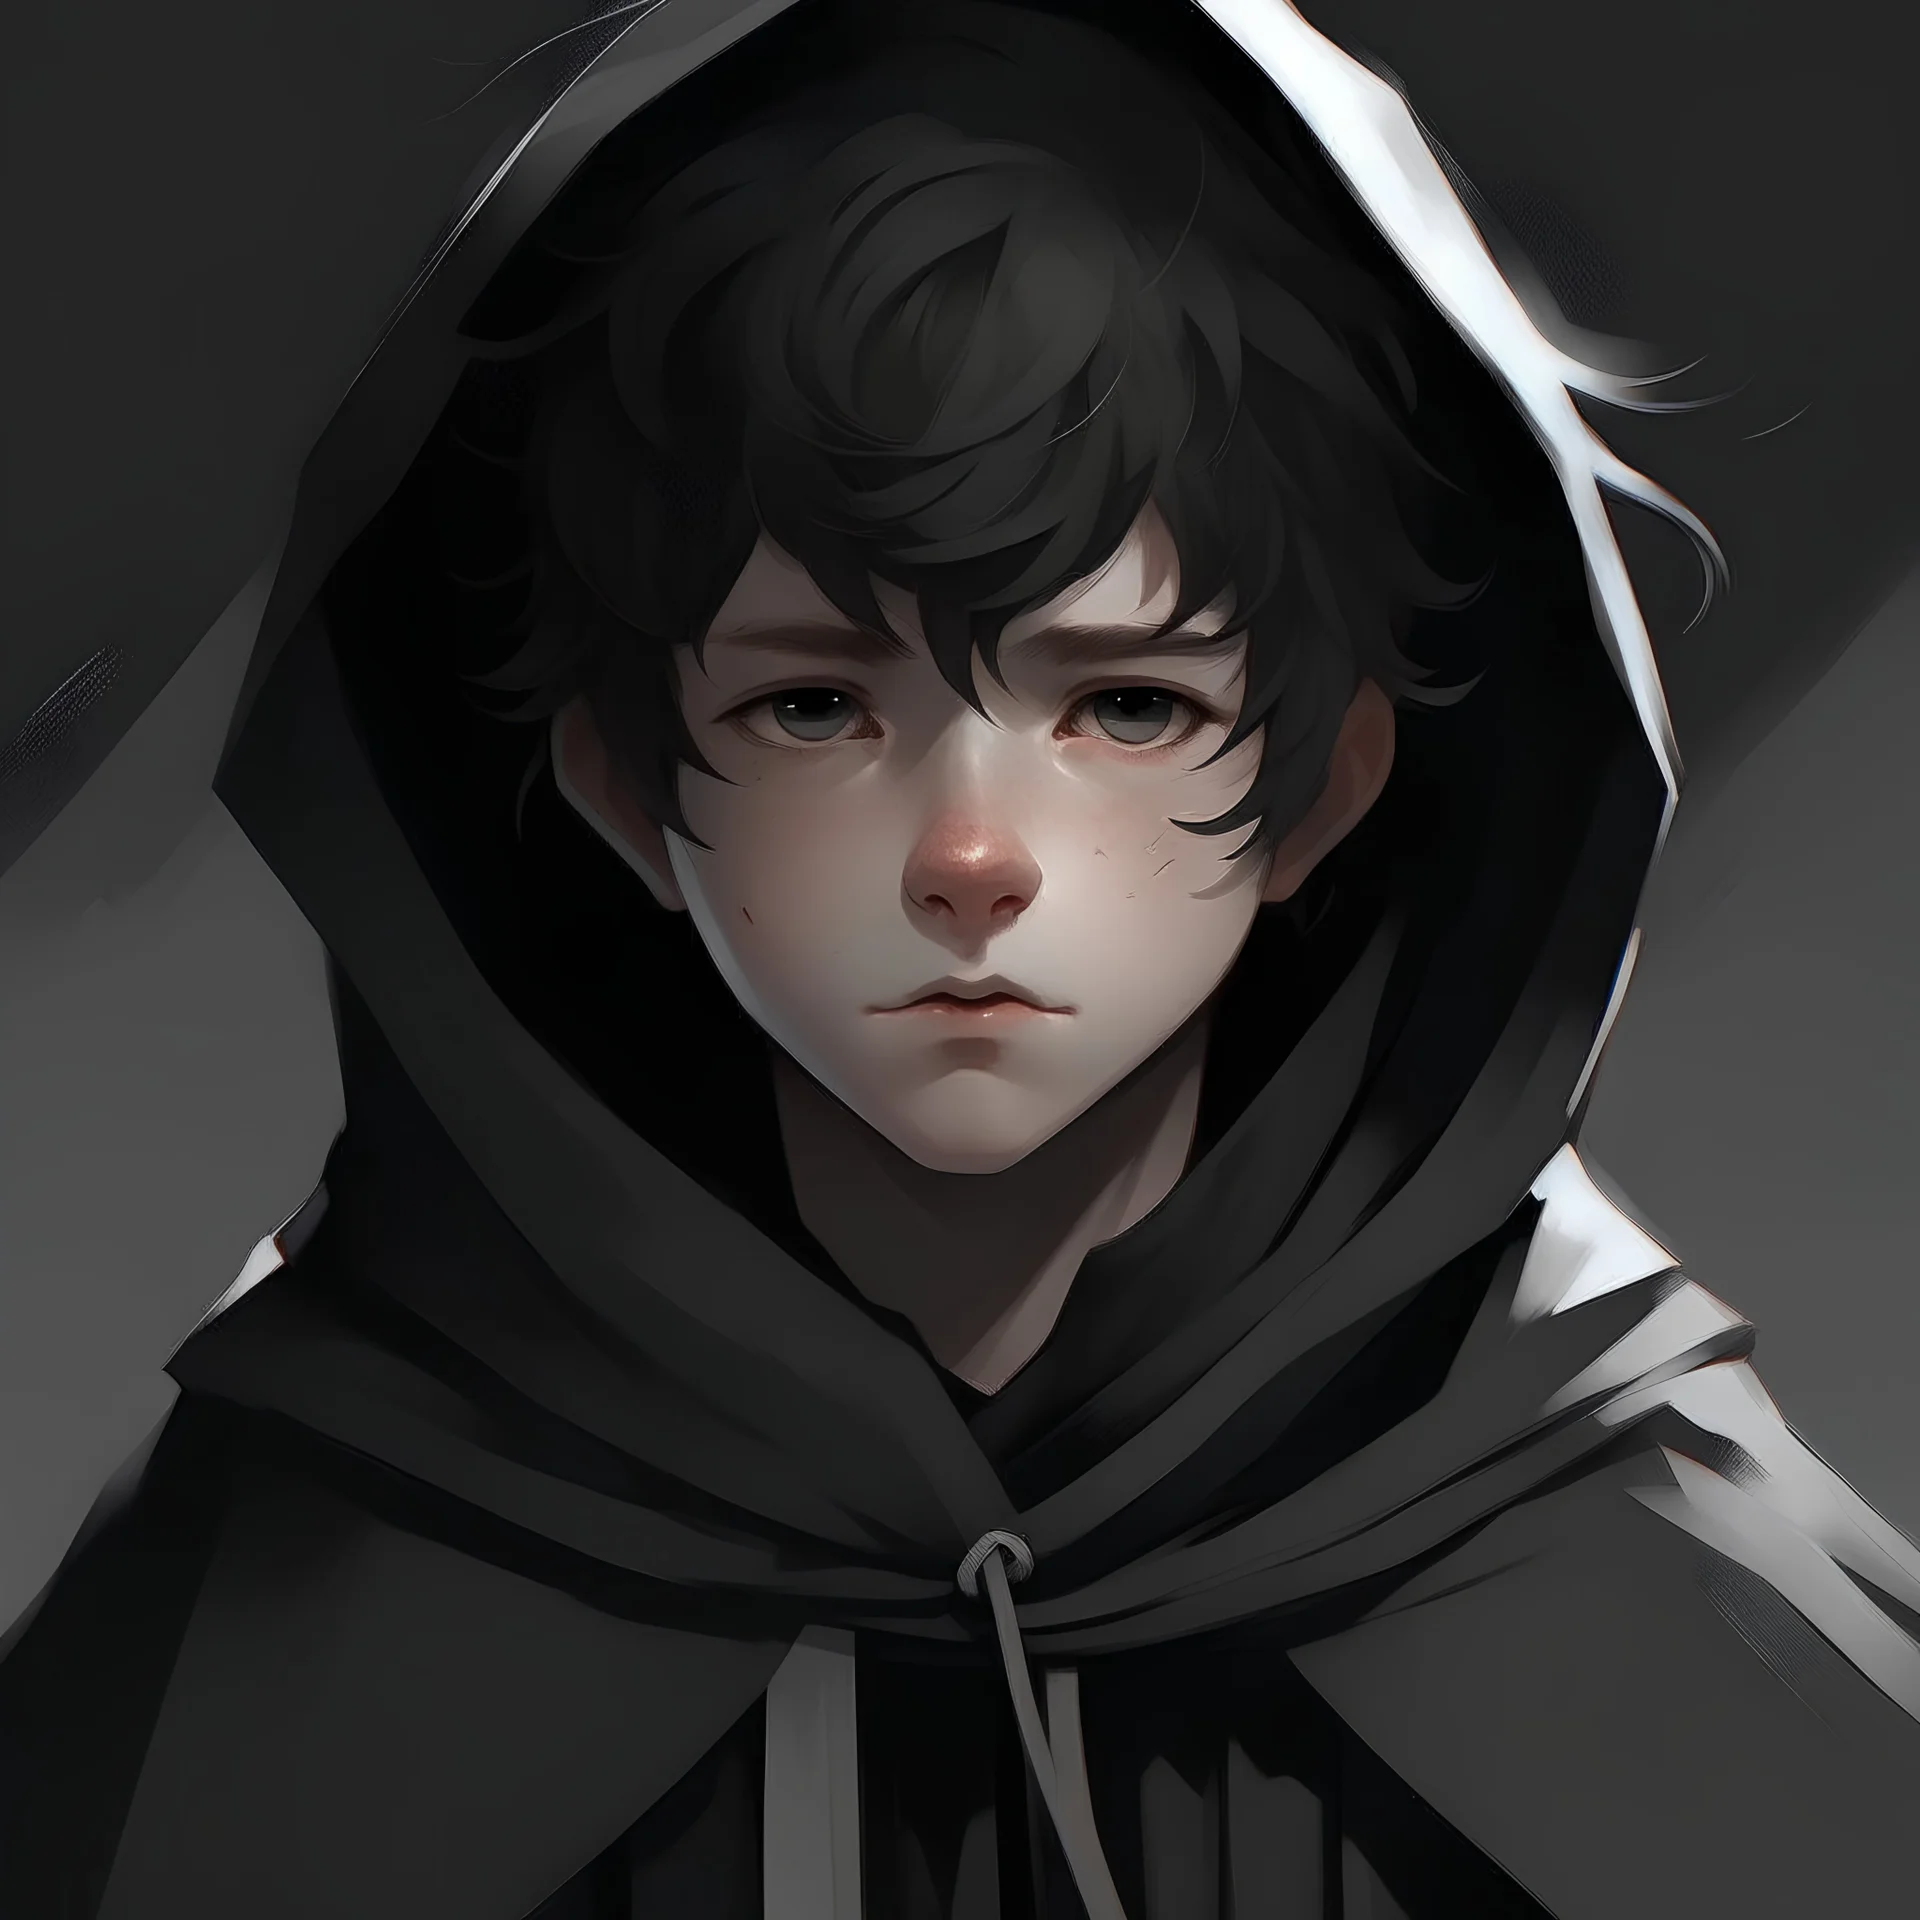 Realistic animated boy with white skin, short and messy hair that is black with white streaks through it, wearing black cloak dnd